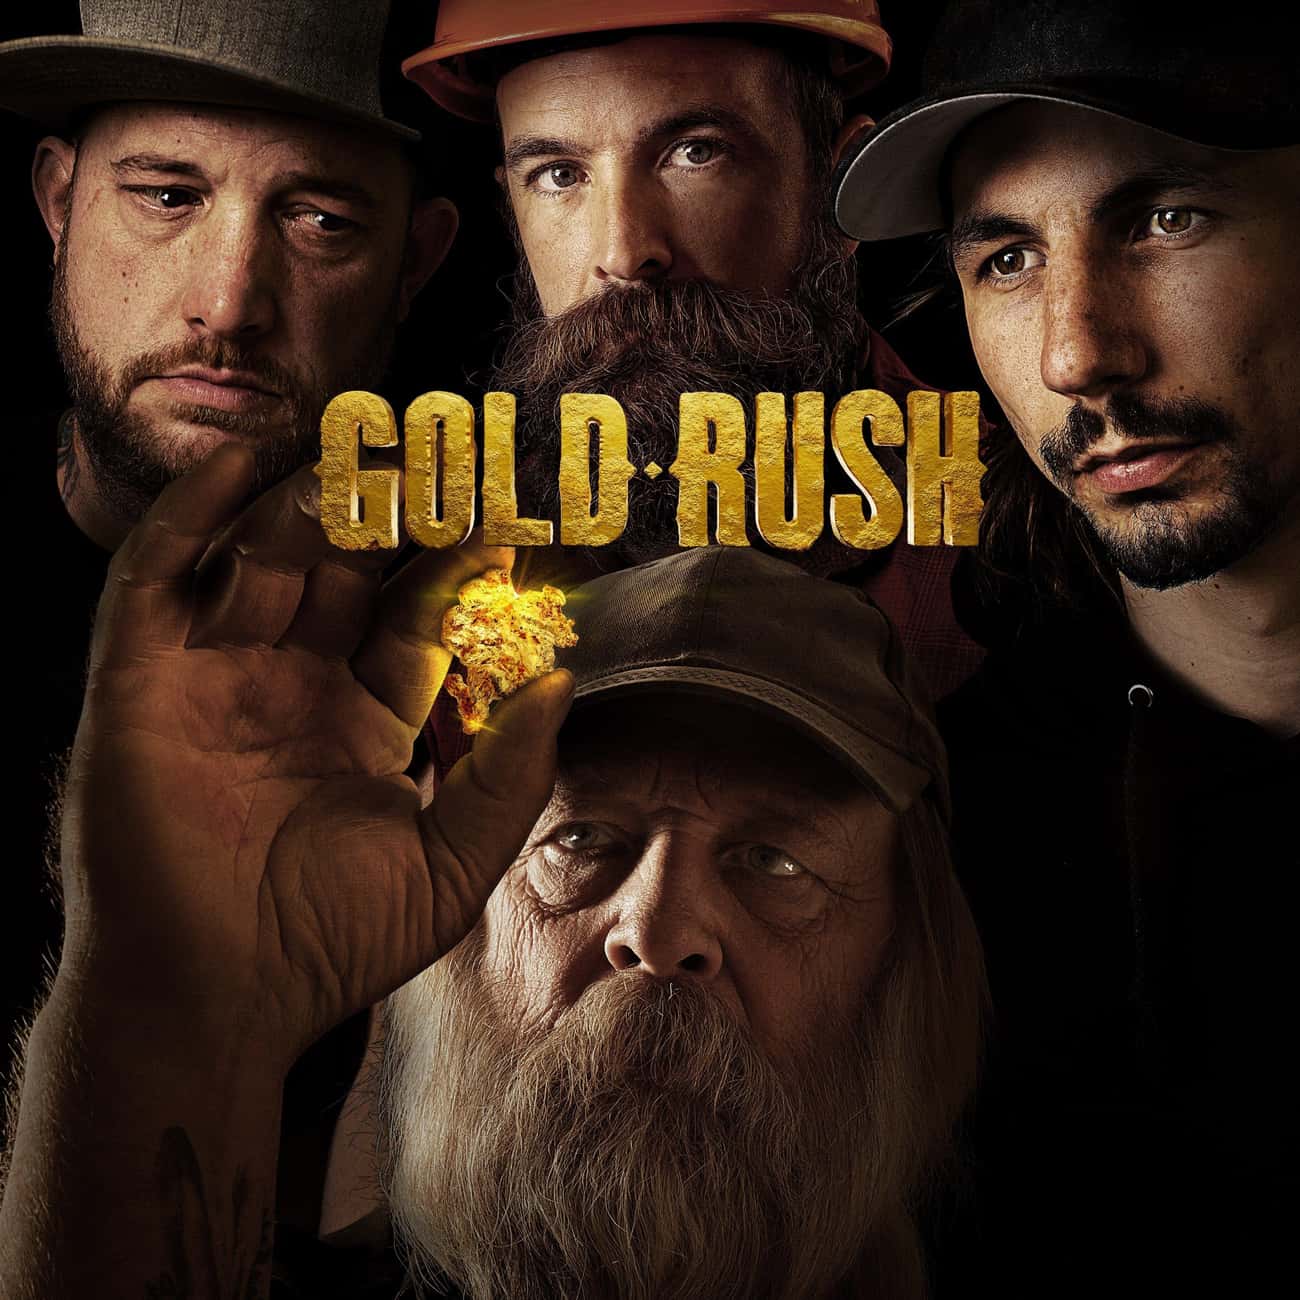 The 10 Best TV Shows About Gold Mining